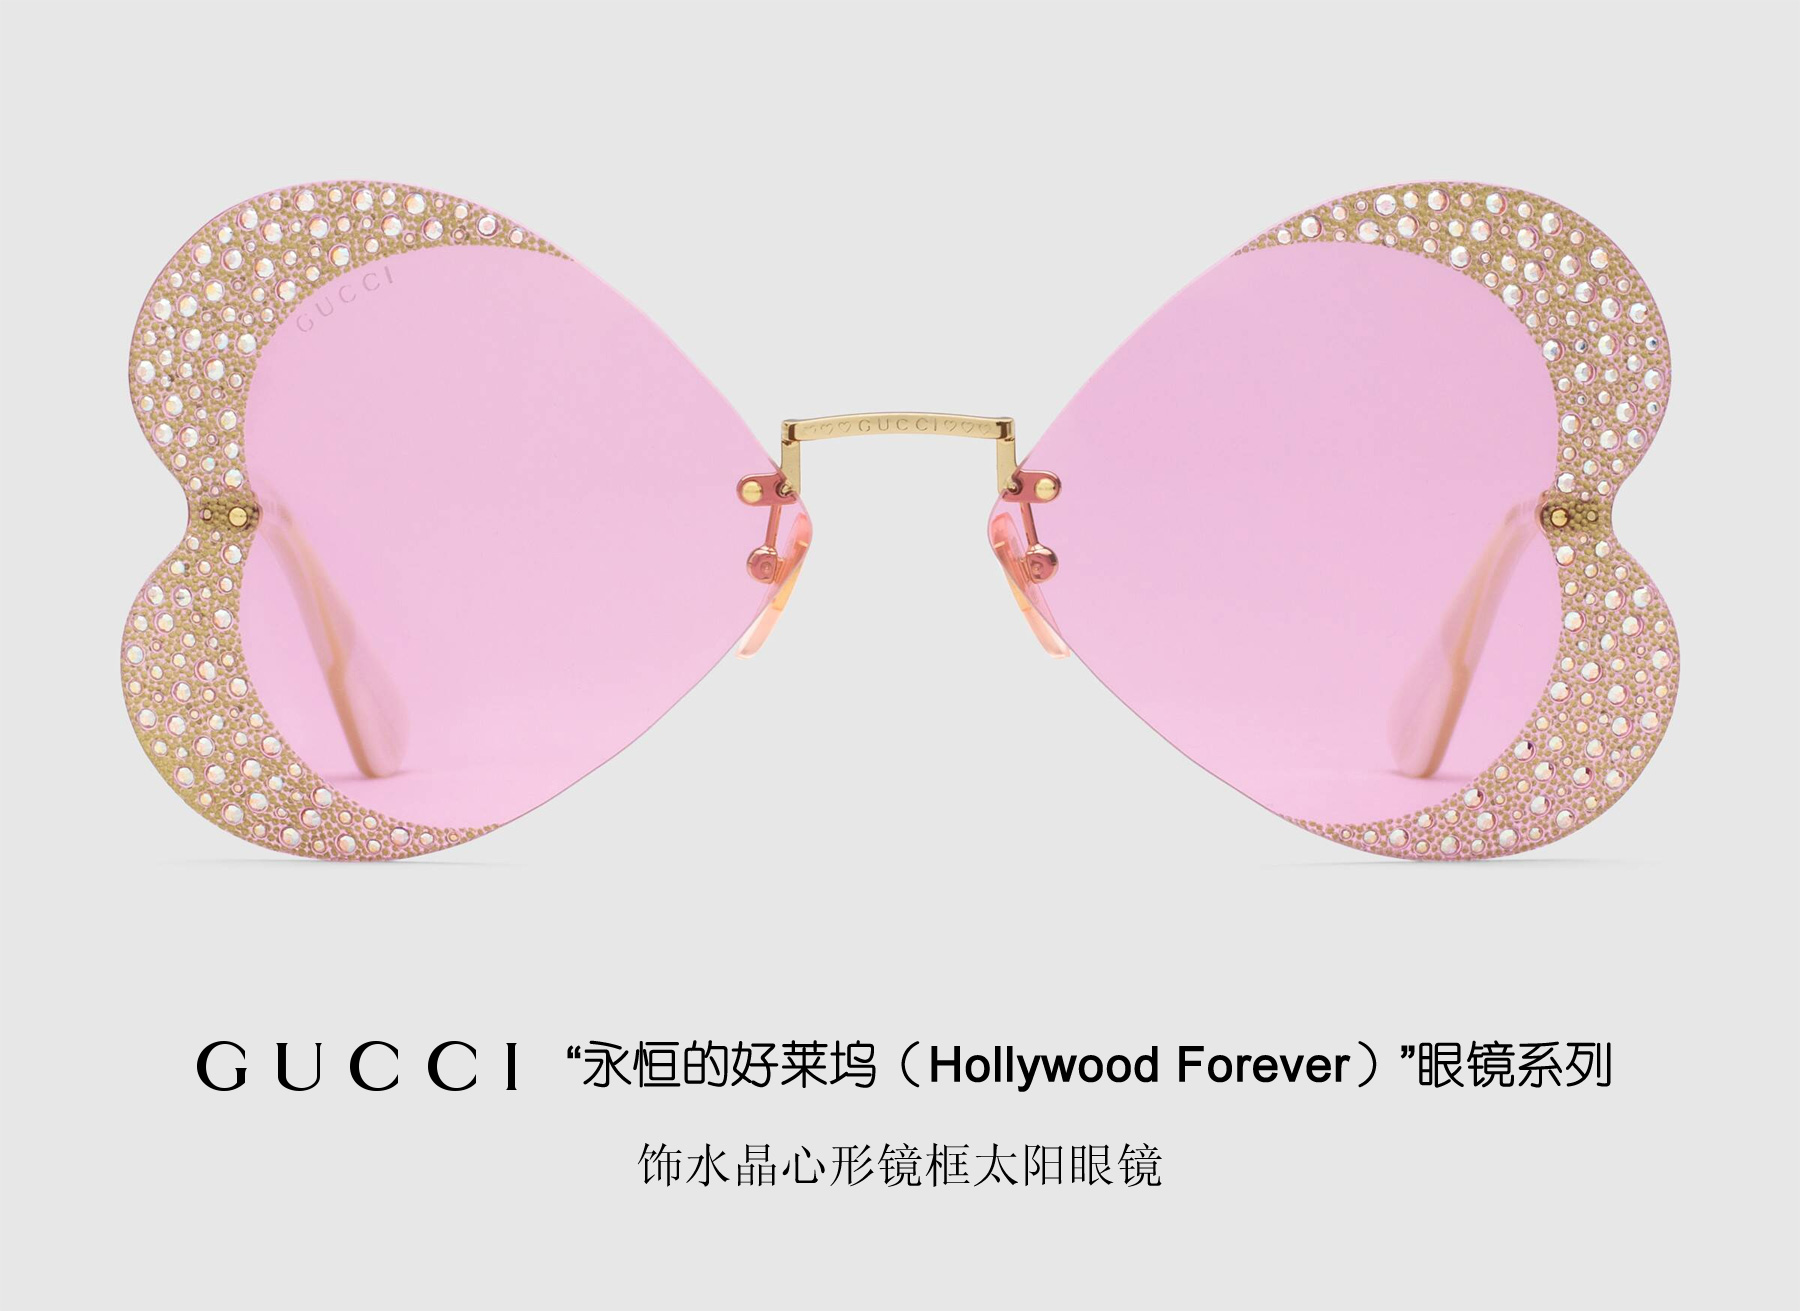 Gucci 推出“永恒的好莱坞（Hollywood Forever）”太阳眼镜系列– 镜信